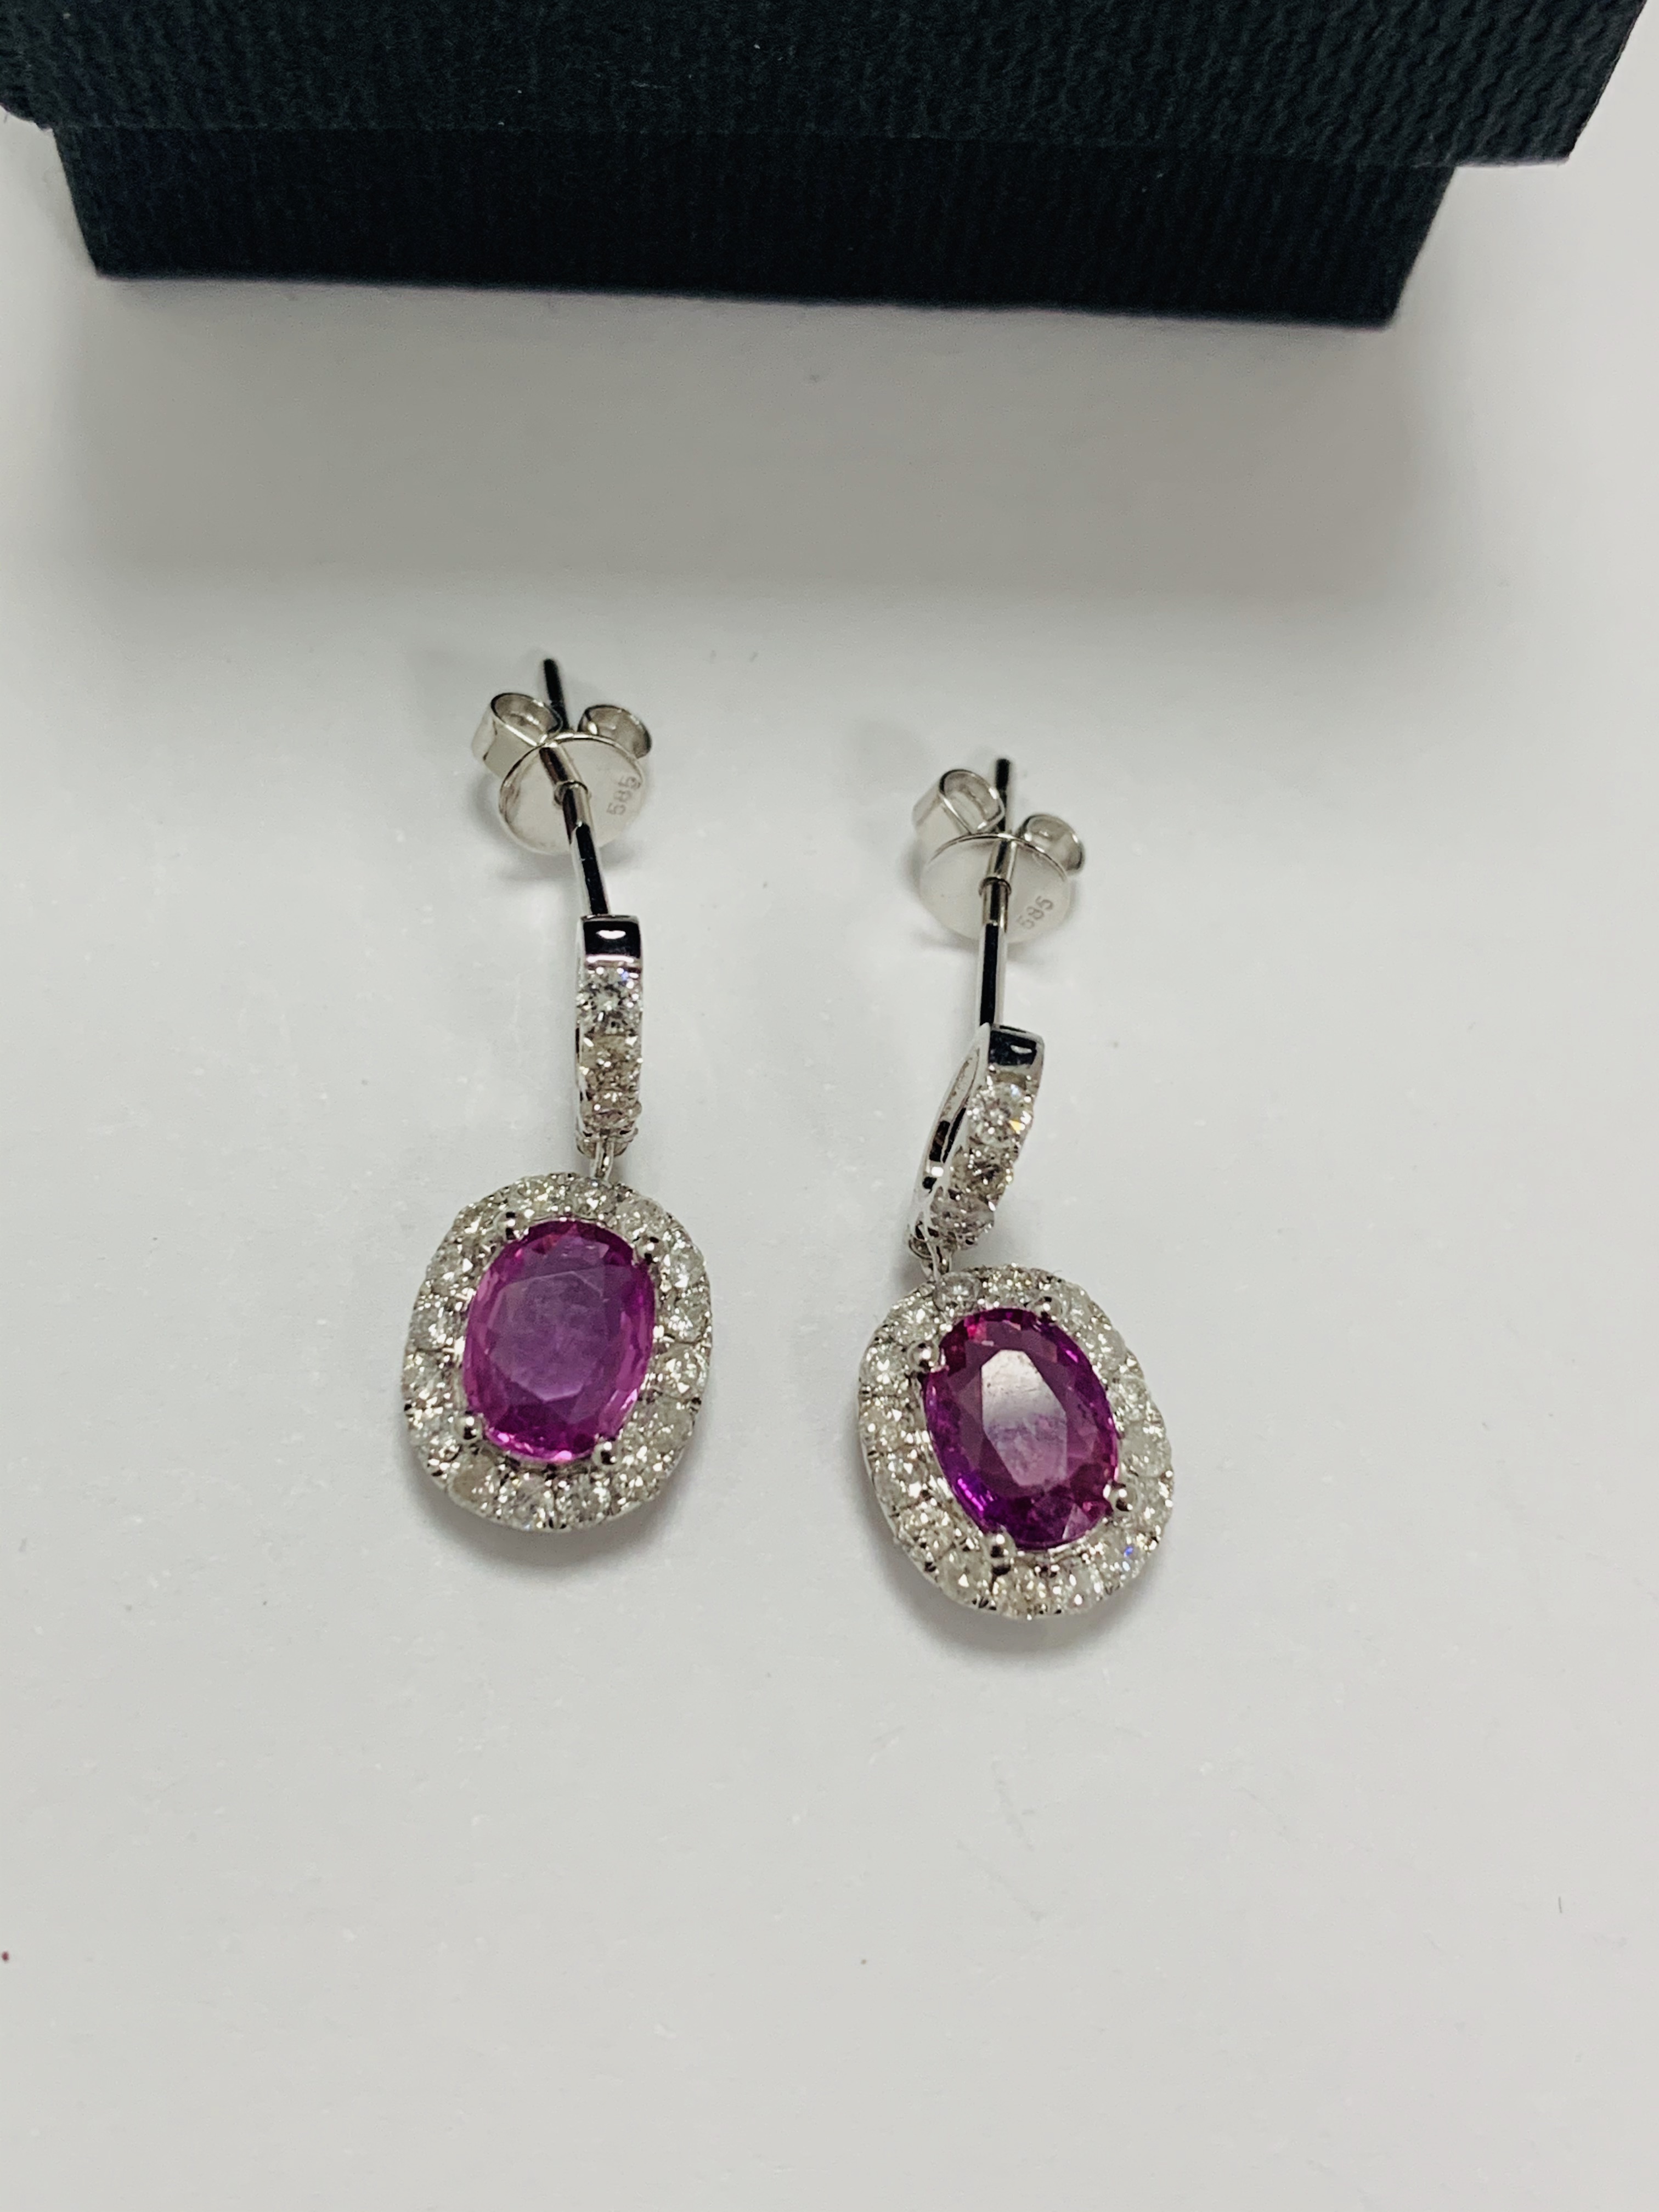 14ct White Gold Sapphire and Diamond drop earrings featuring, 2 oval cut, pink Sapphires (1.66ct TSW - Image 5 of 9